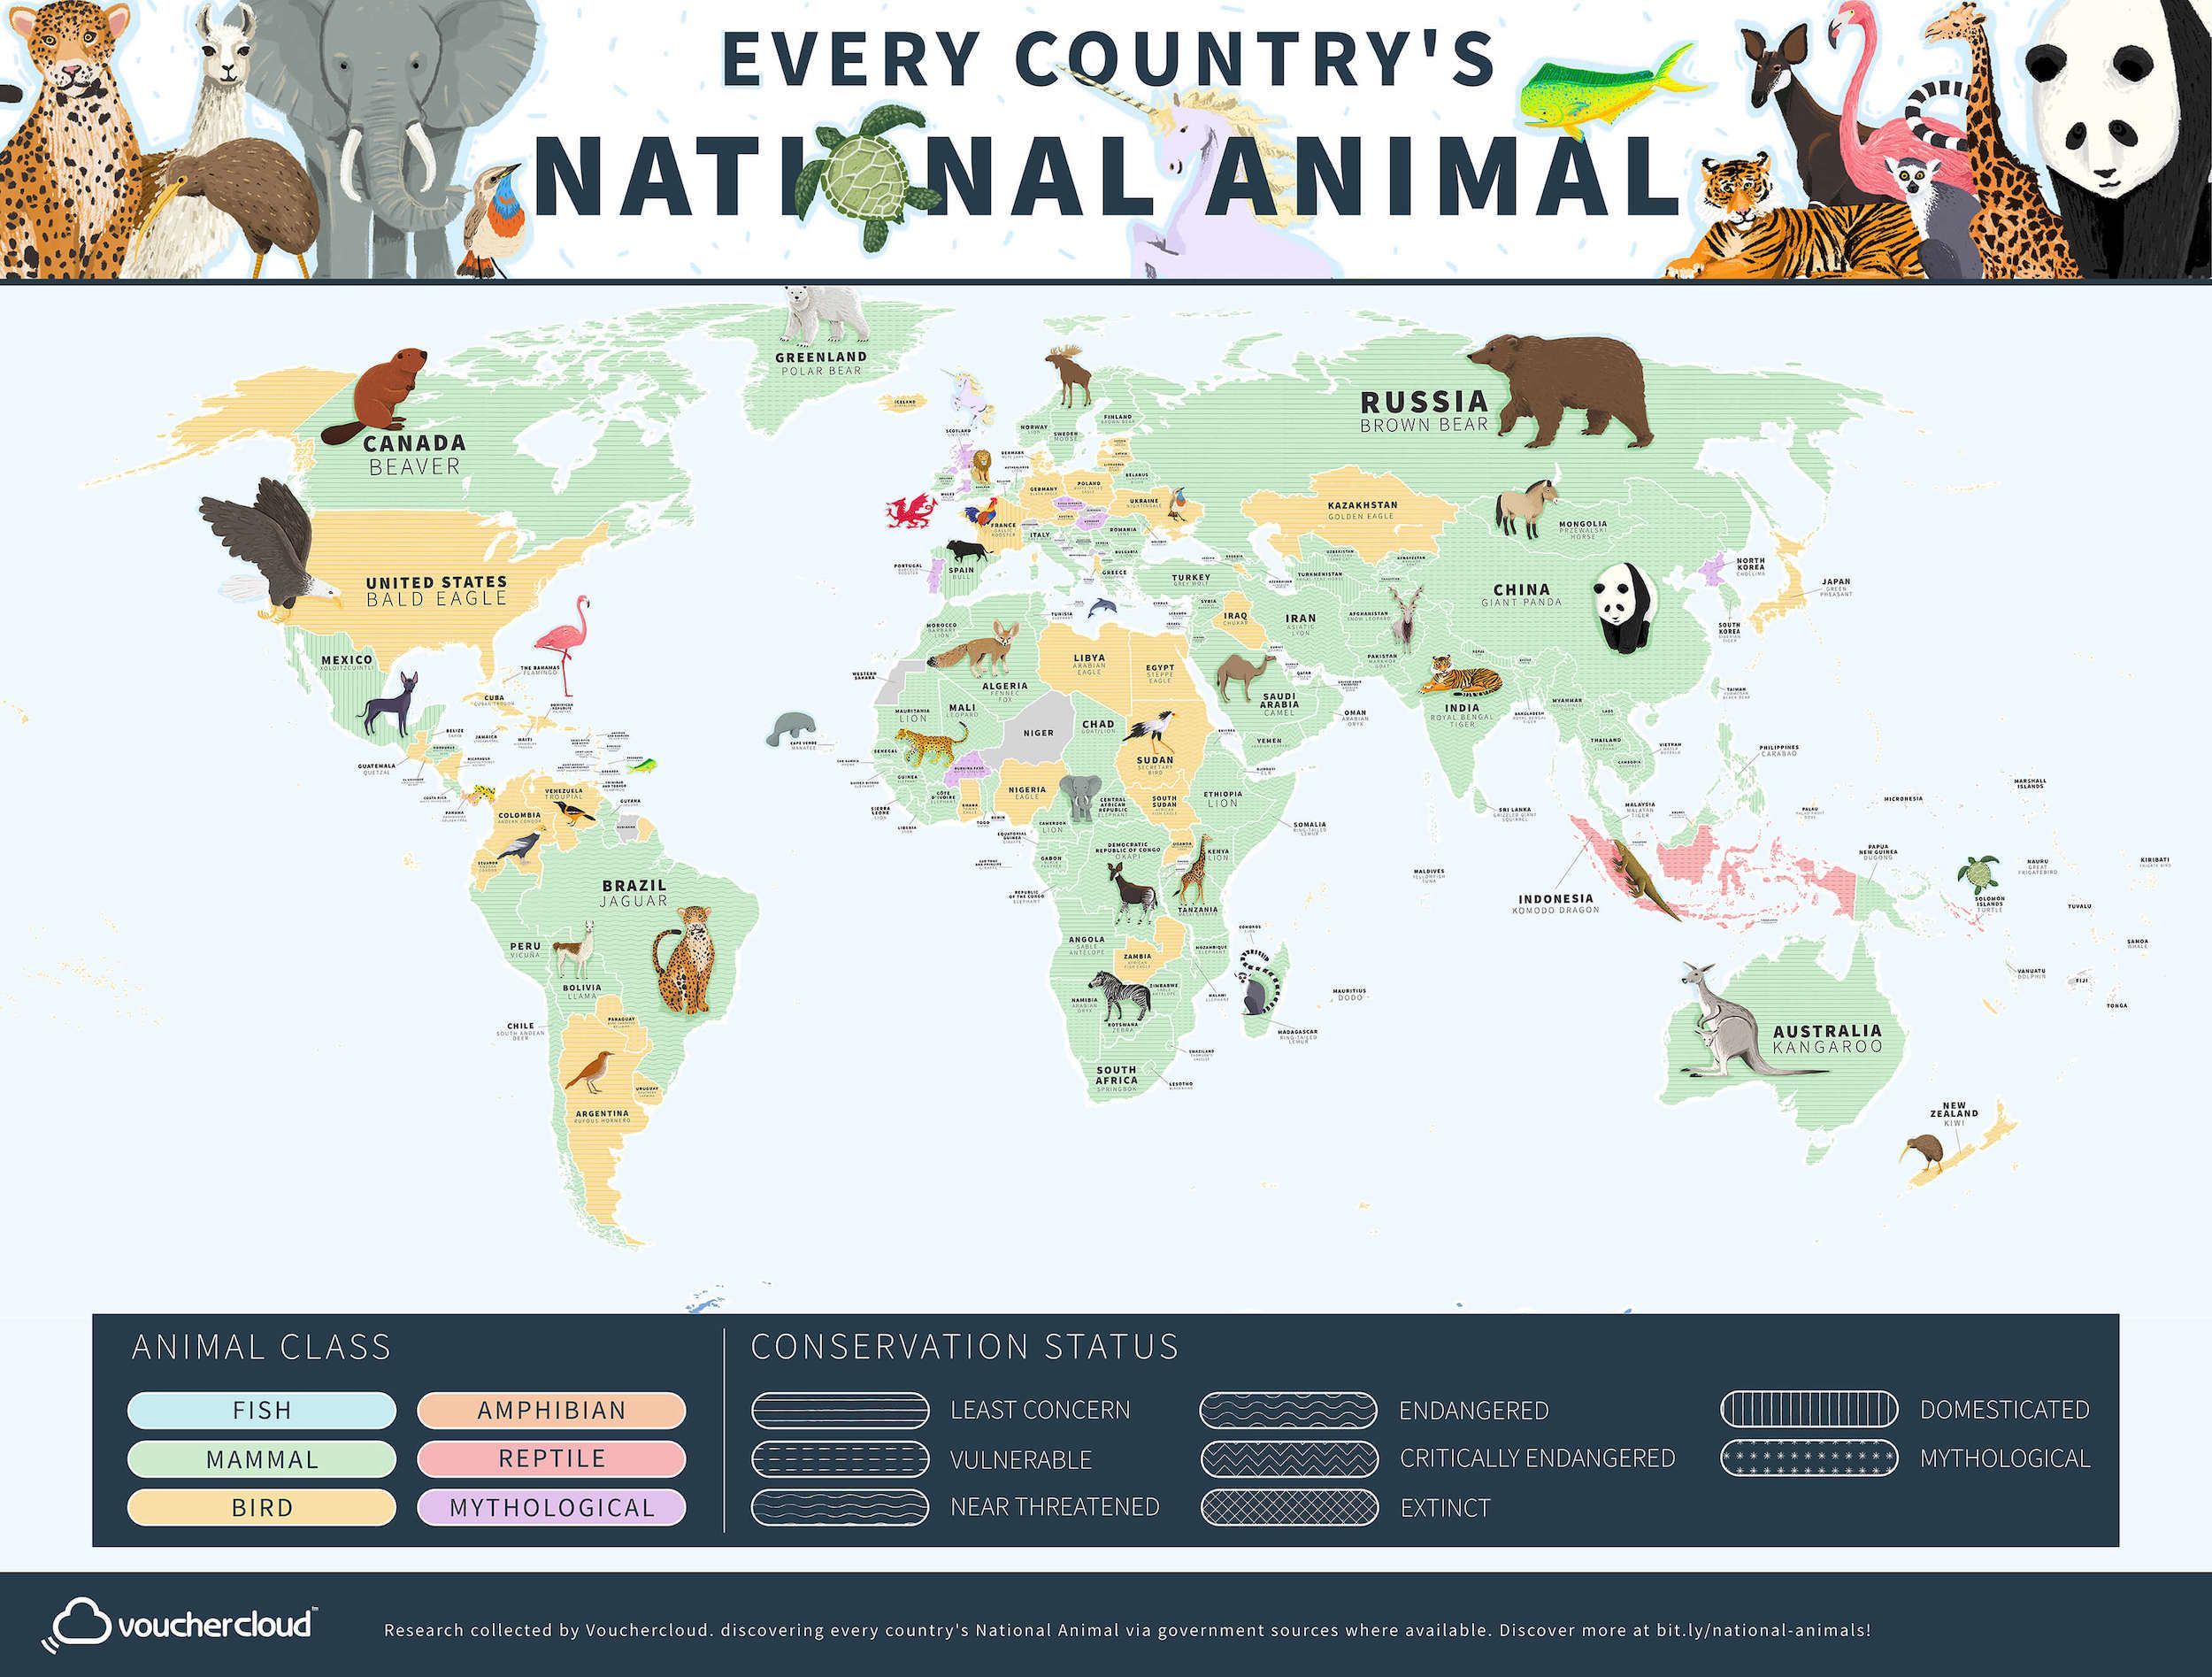 National animal conservation status map